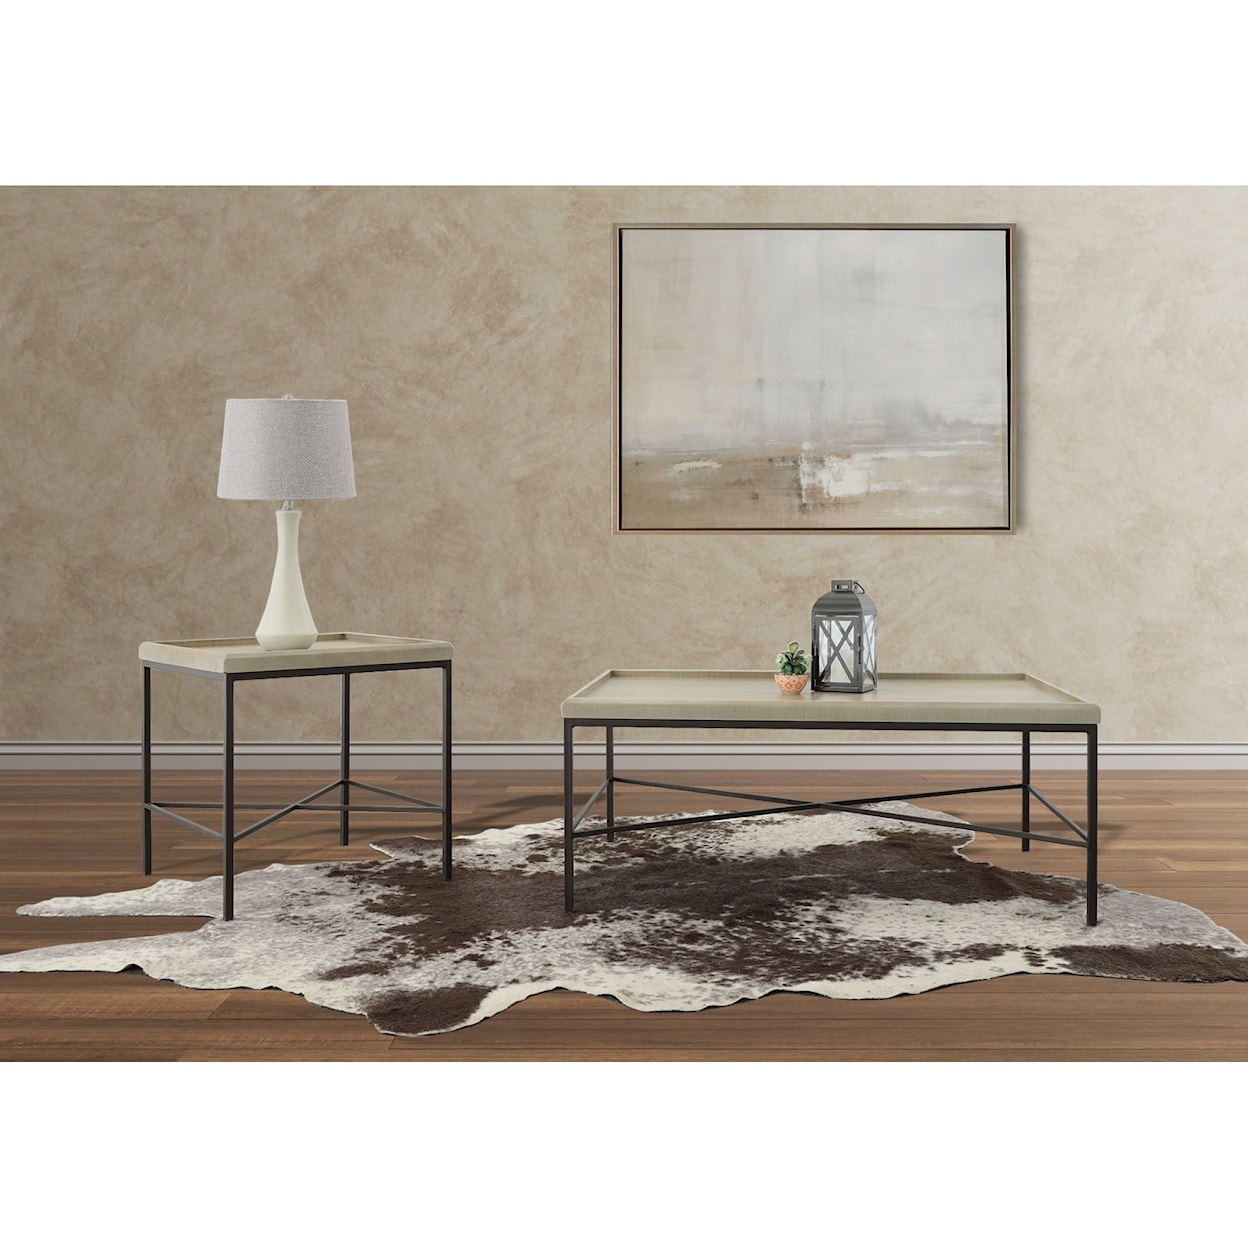 Elements International Timesch Natural Coffee Table with Metal Frame